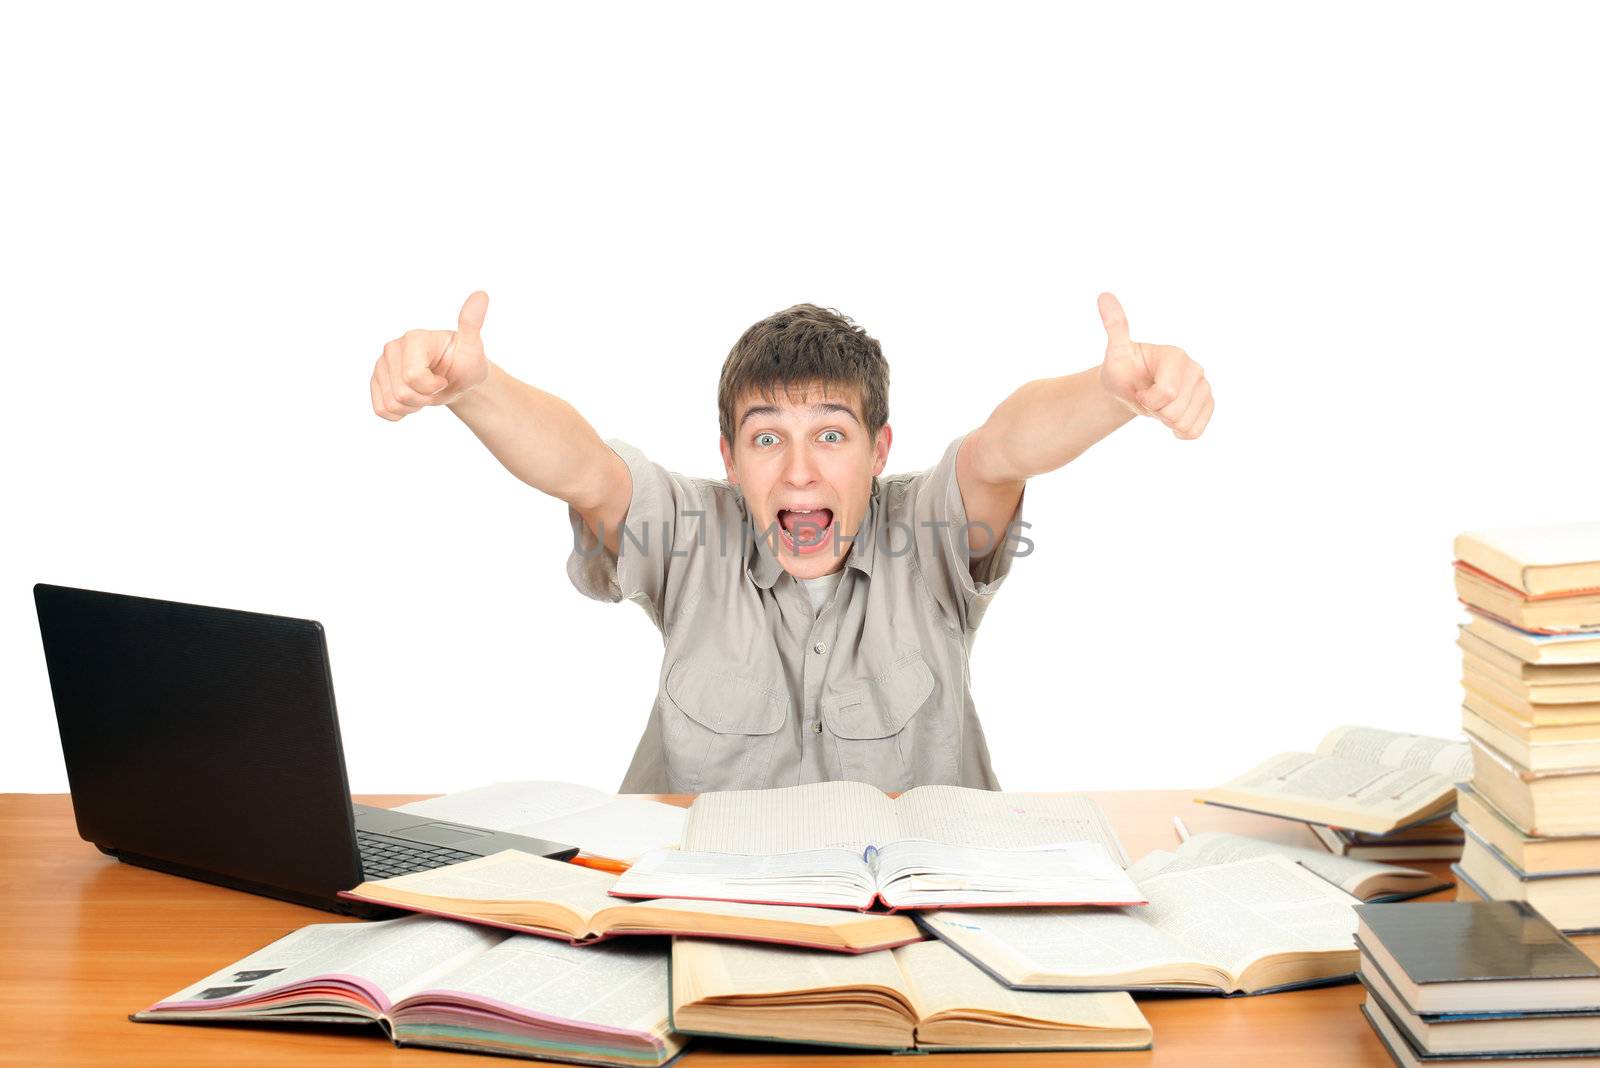 Happy Student on the School Desk shows OK gesture. Isolated on the White Background